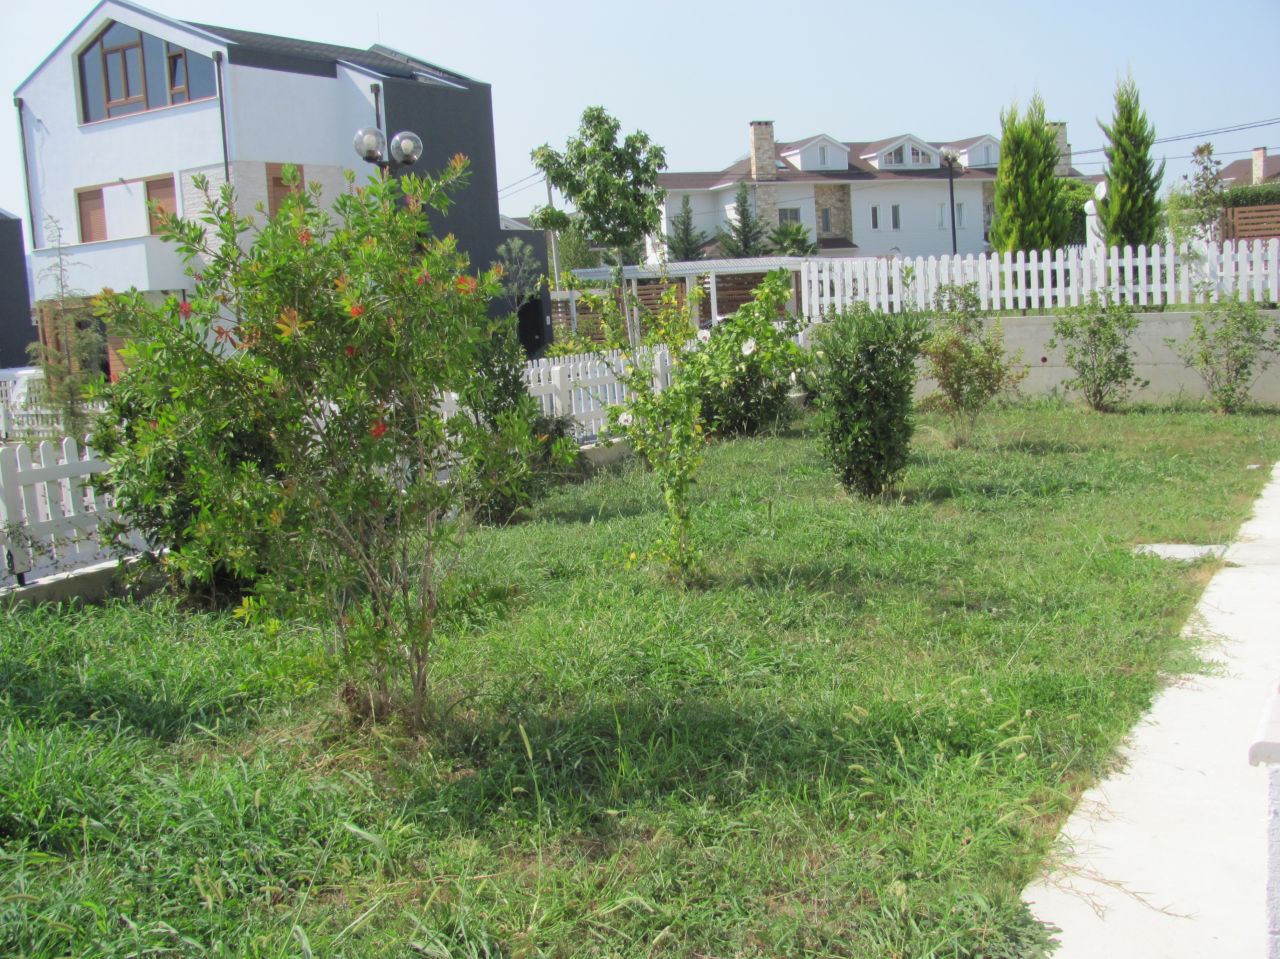 property for rent in tirana, the construction is brand new and the place very peaceful